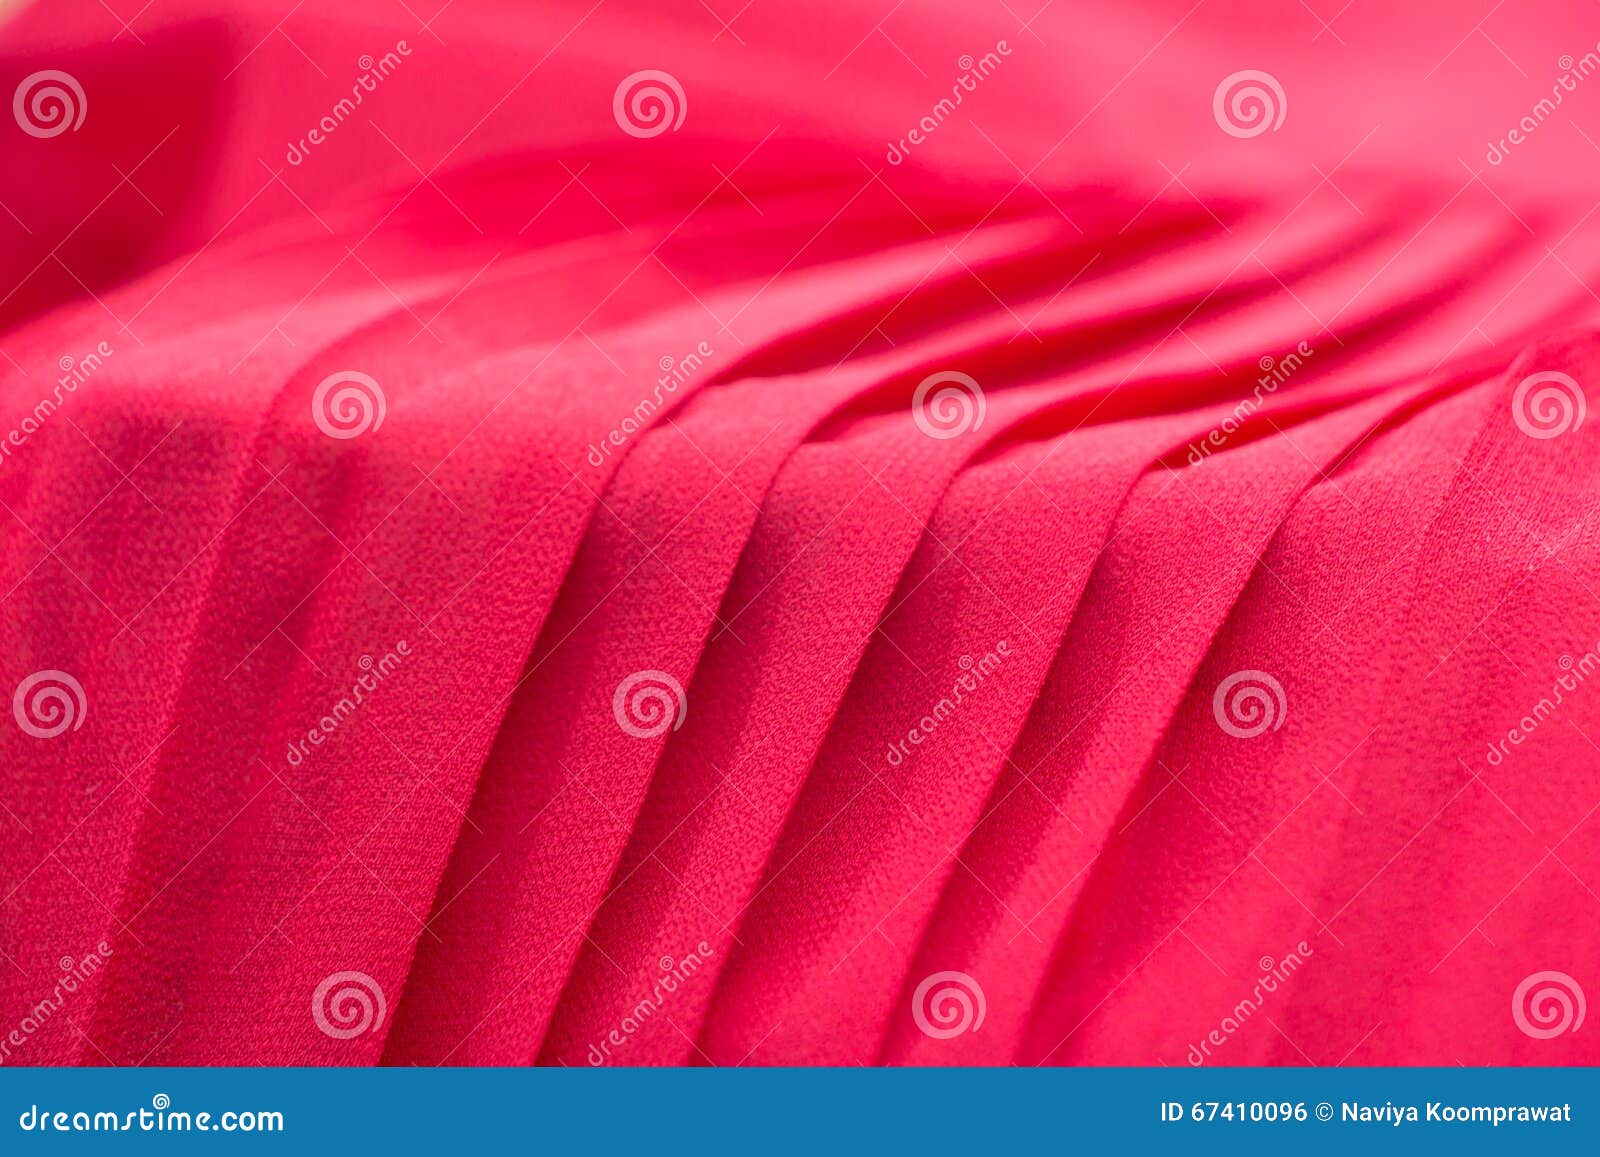 red pleat fabric background